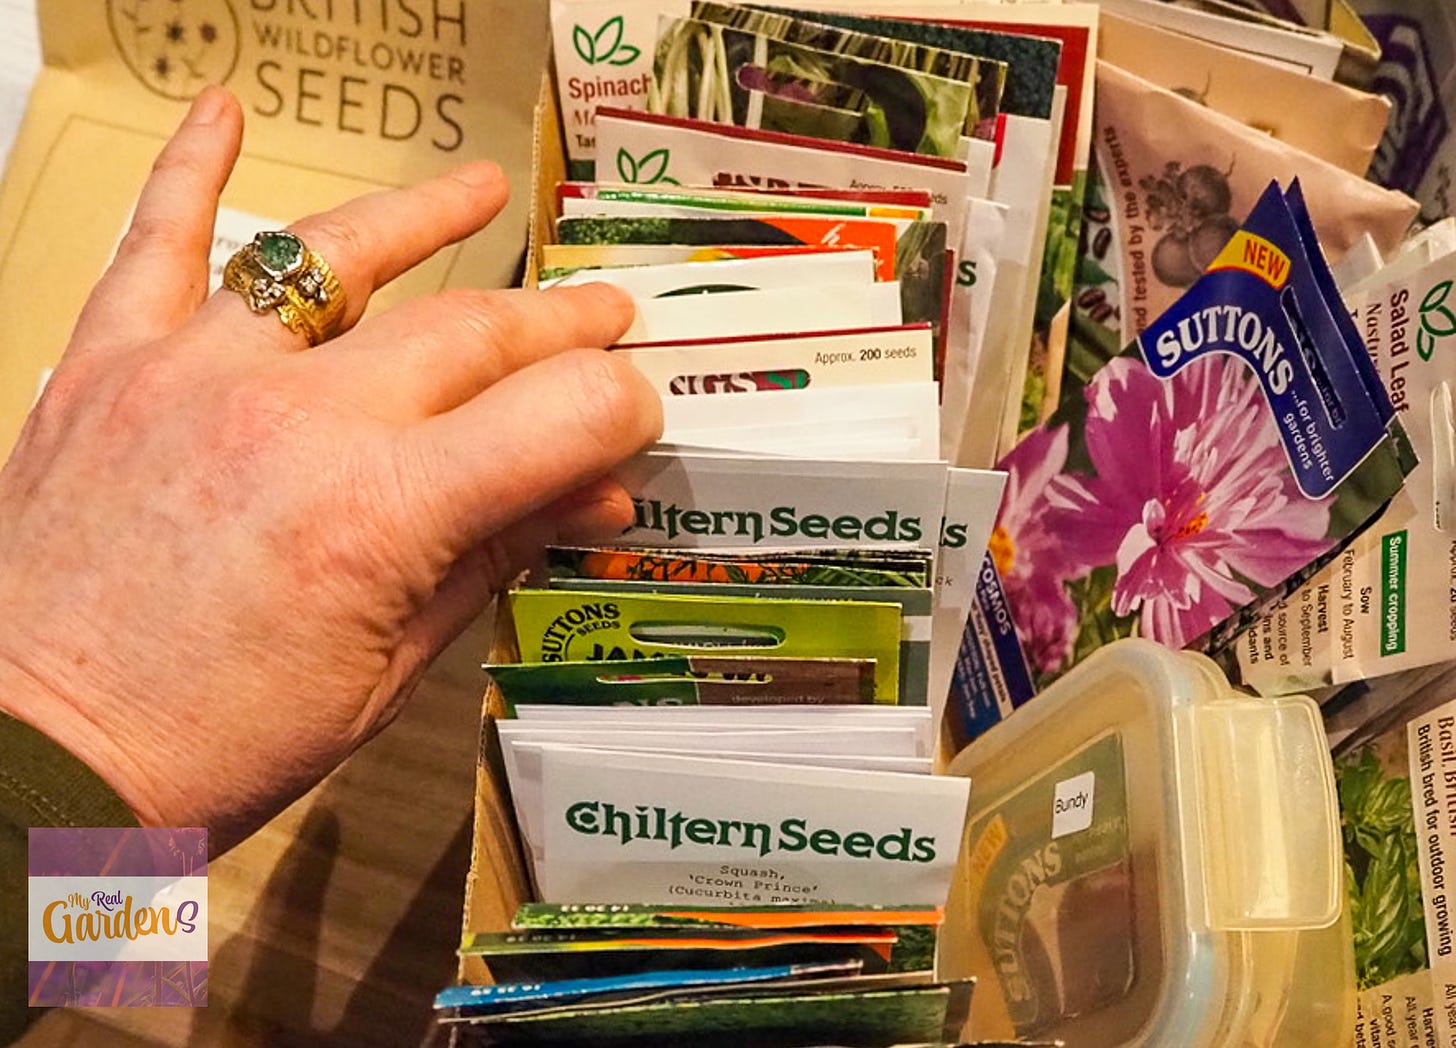 Thumbing through seeds in a box